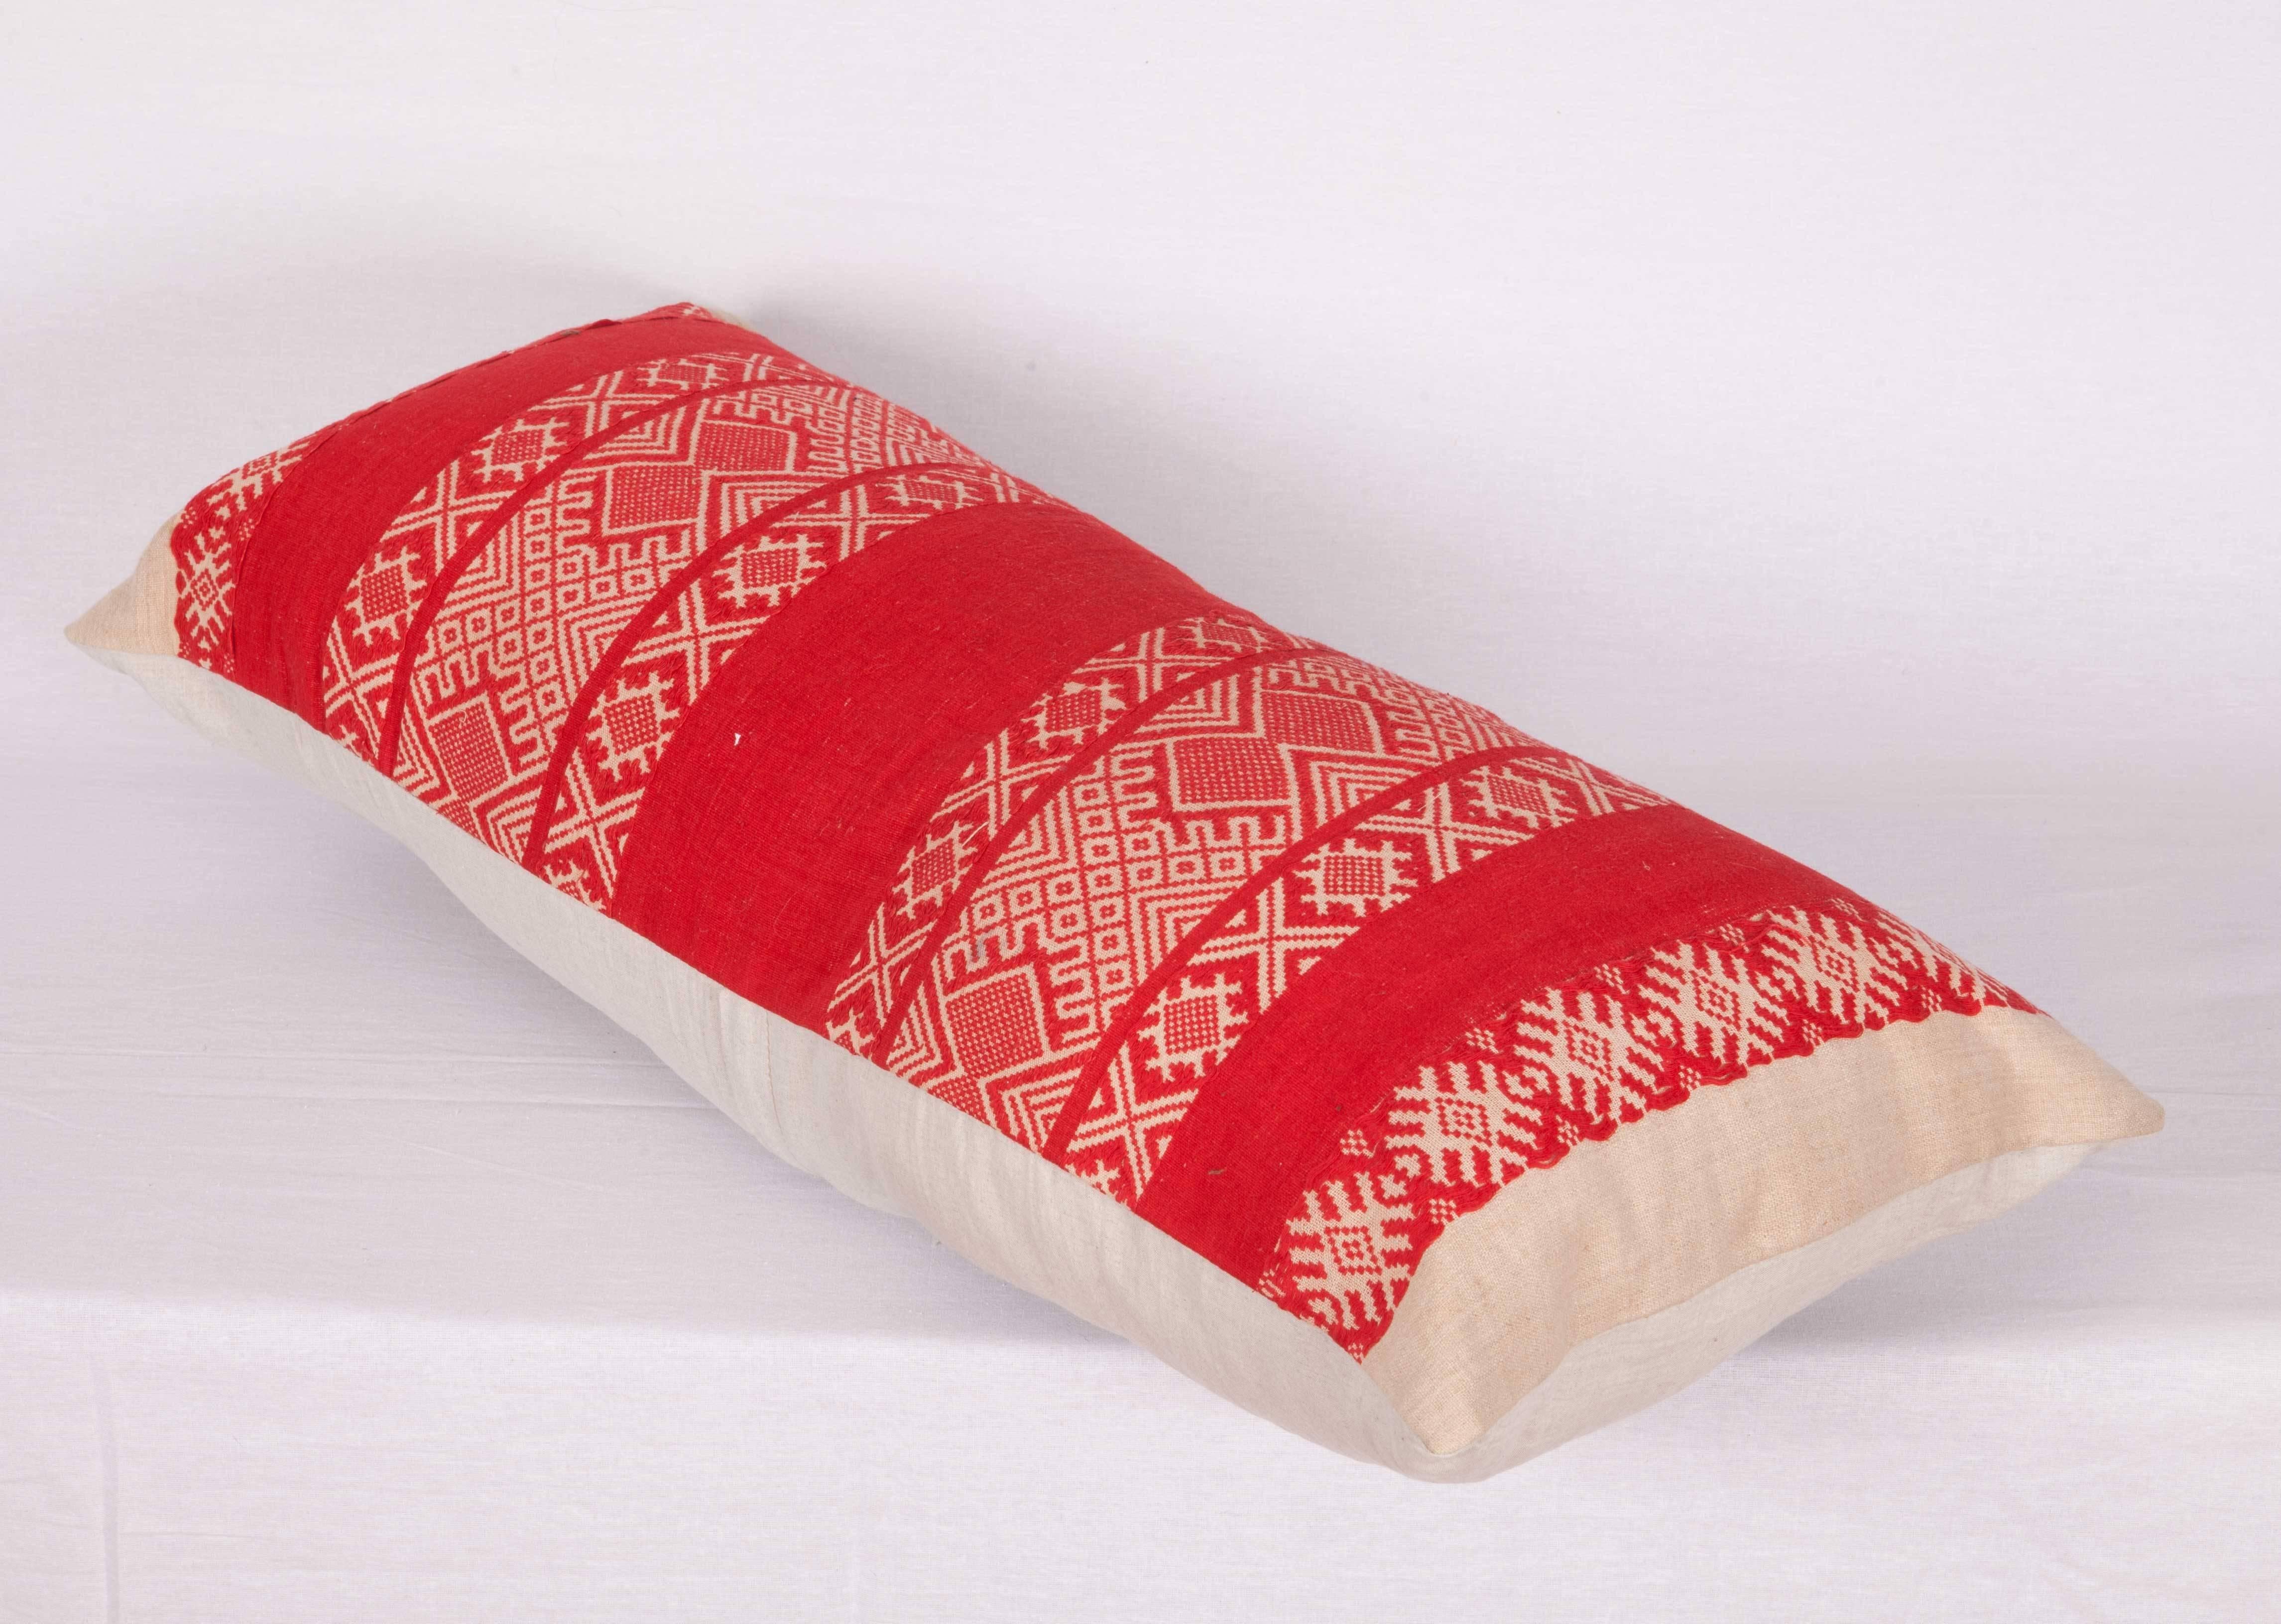 Bulgarian Pillowmade Out of an Early 20th Century Balkan Textile